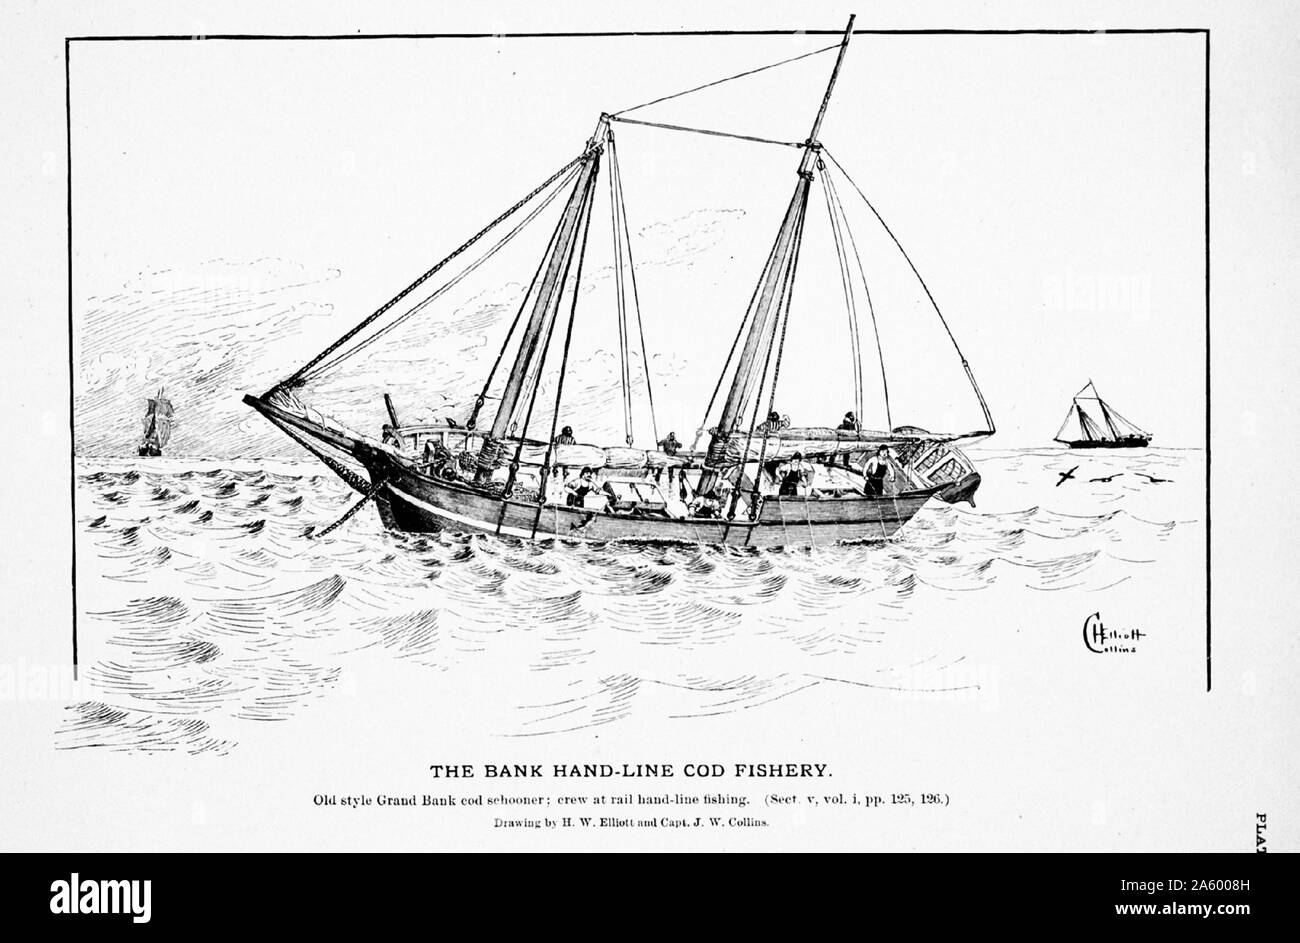 Drawing of an old style Grand Bank cod schooner by H. W. Elliott and Capt. J. W. Collins. Dated 1895 Stock Photo